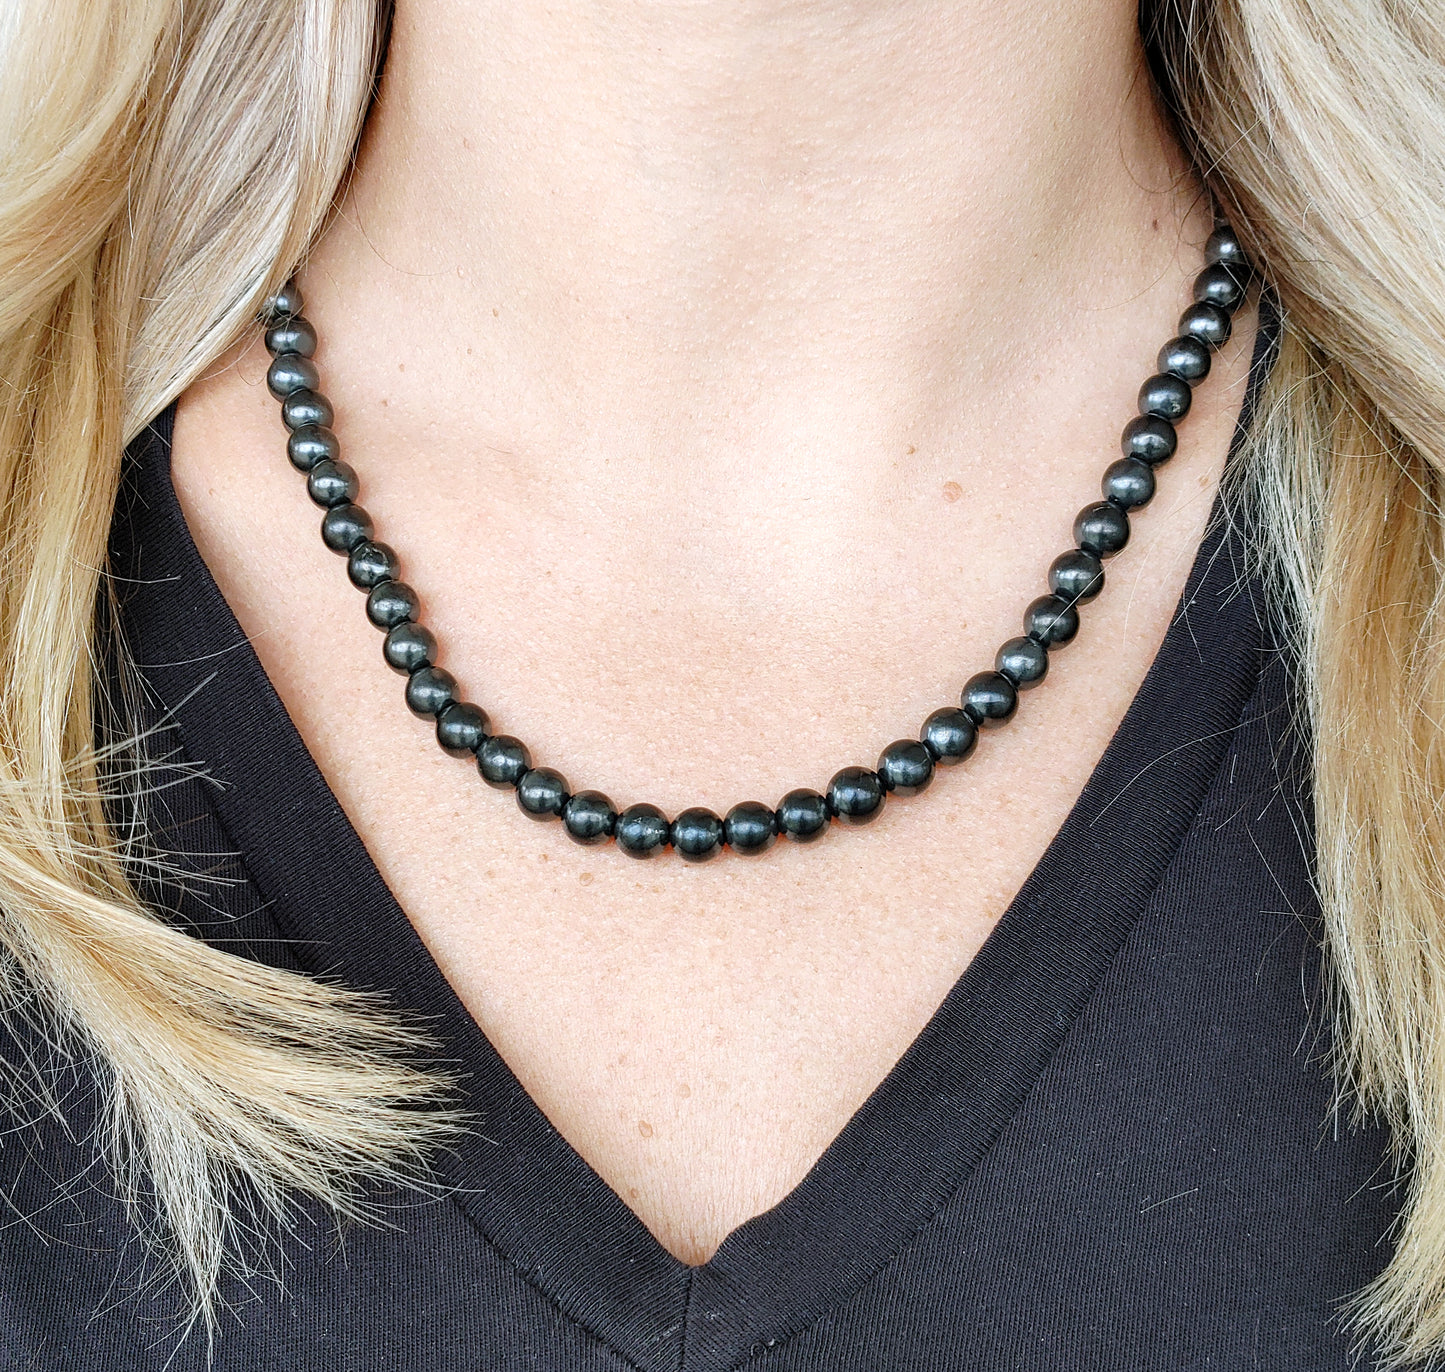 LBN5000 LONG BEADED NECKLACE "BLACK PEARLS" 76 BEADS - 50G TW